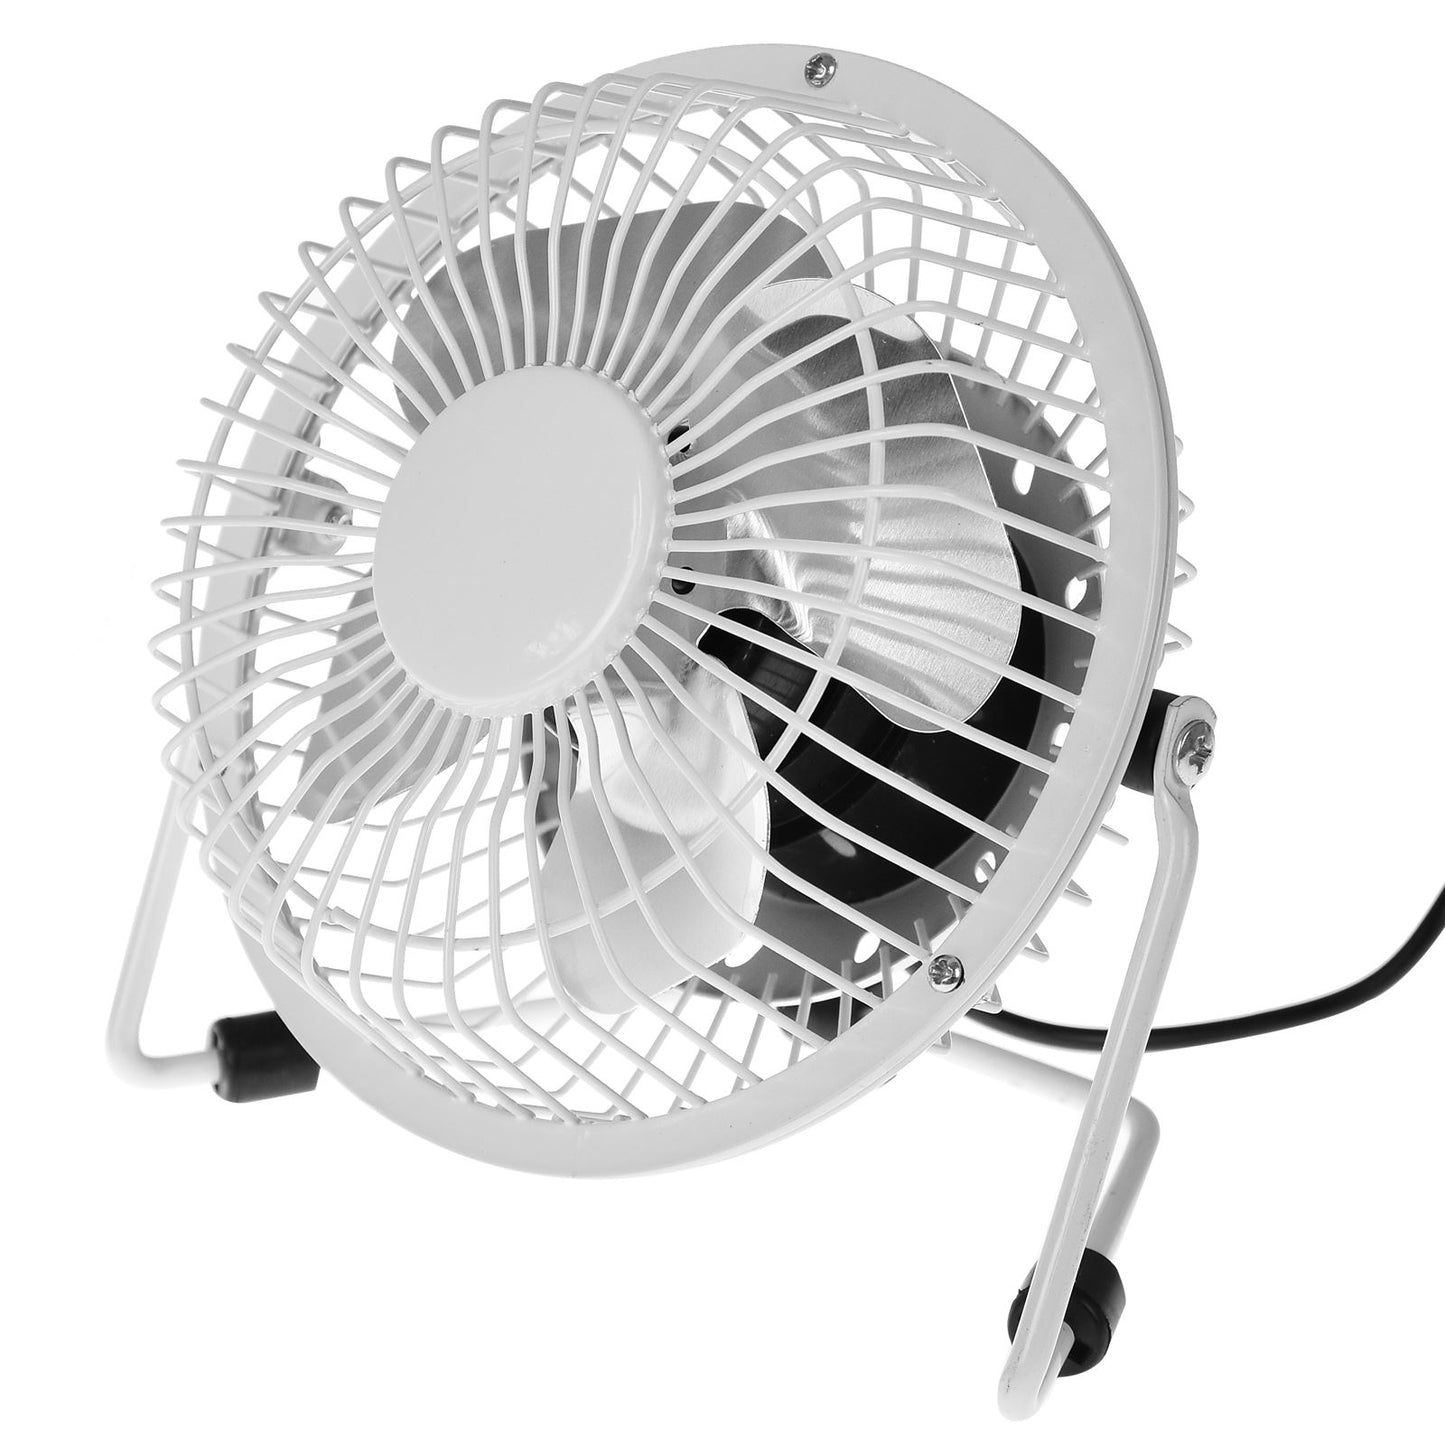 Stay Cool and Comfortable with a Portable Desk Fan